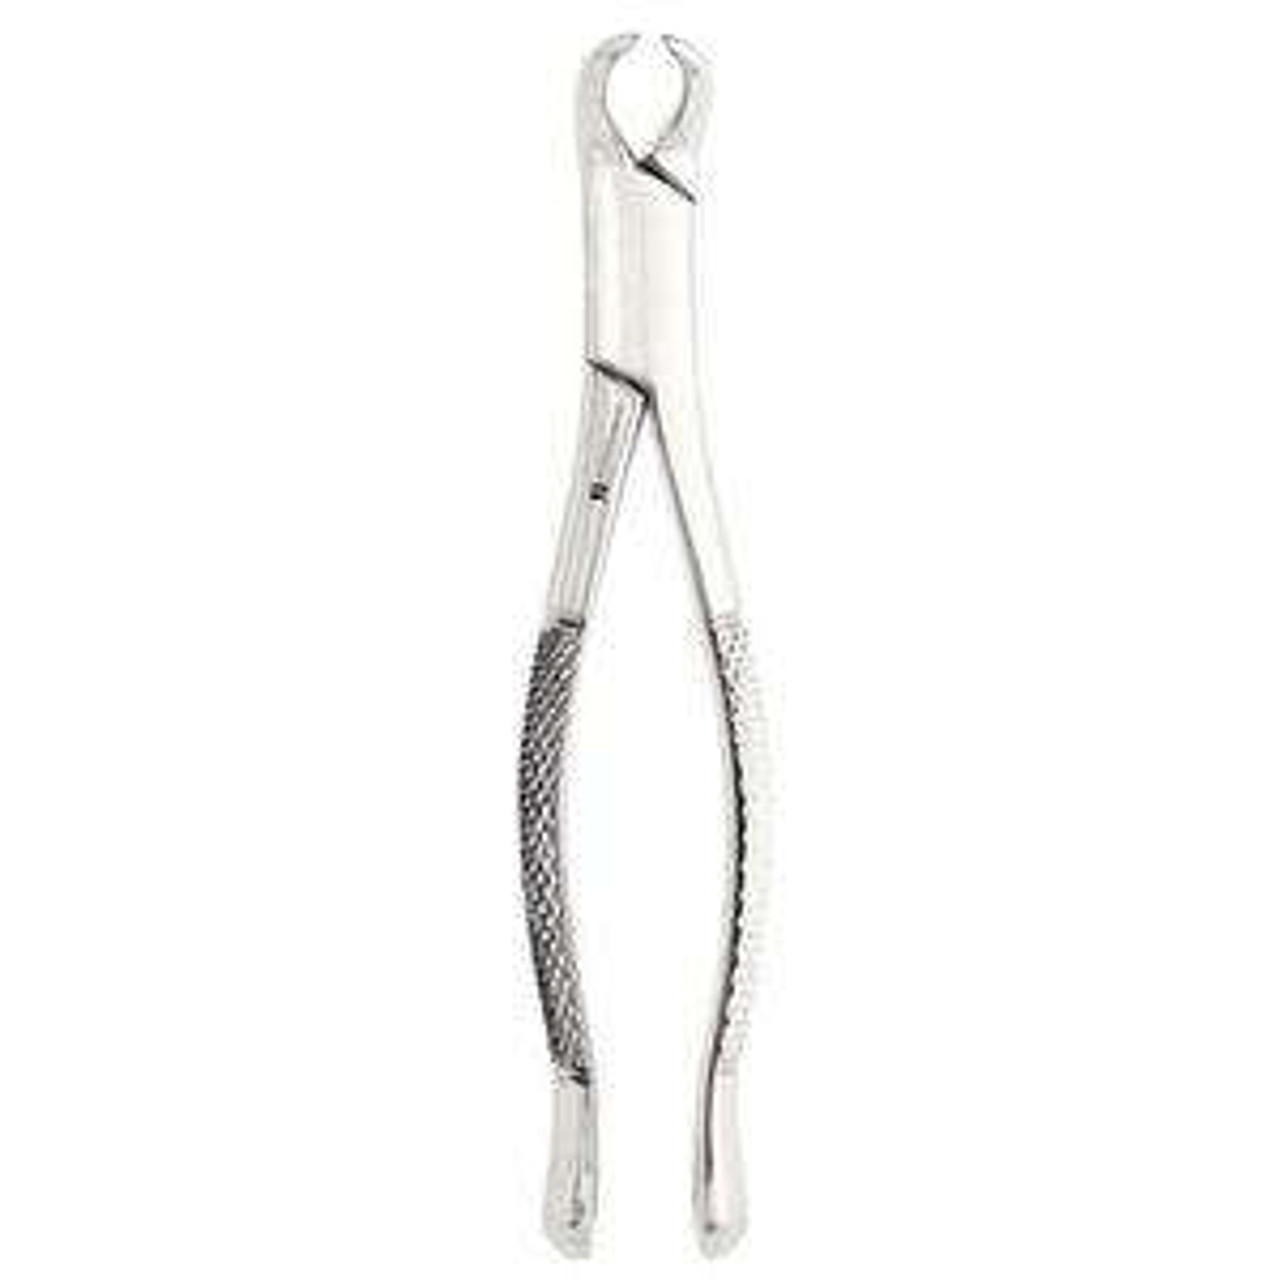 J & J Instruments - EXTRACTING FORCEPS #23